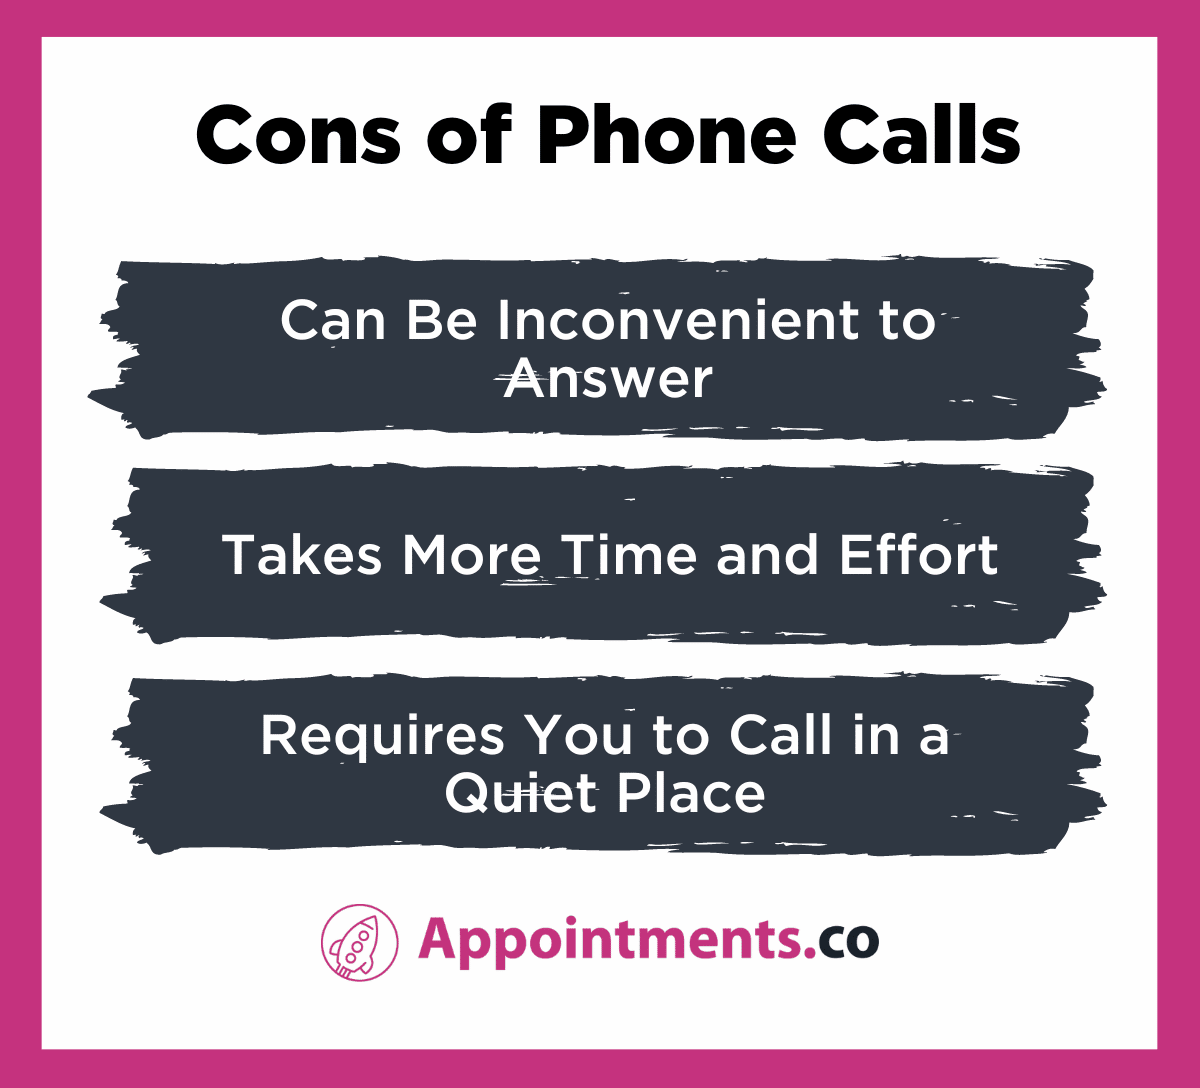 Email Vs. Phone Call - Cons of Phone Calls